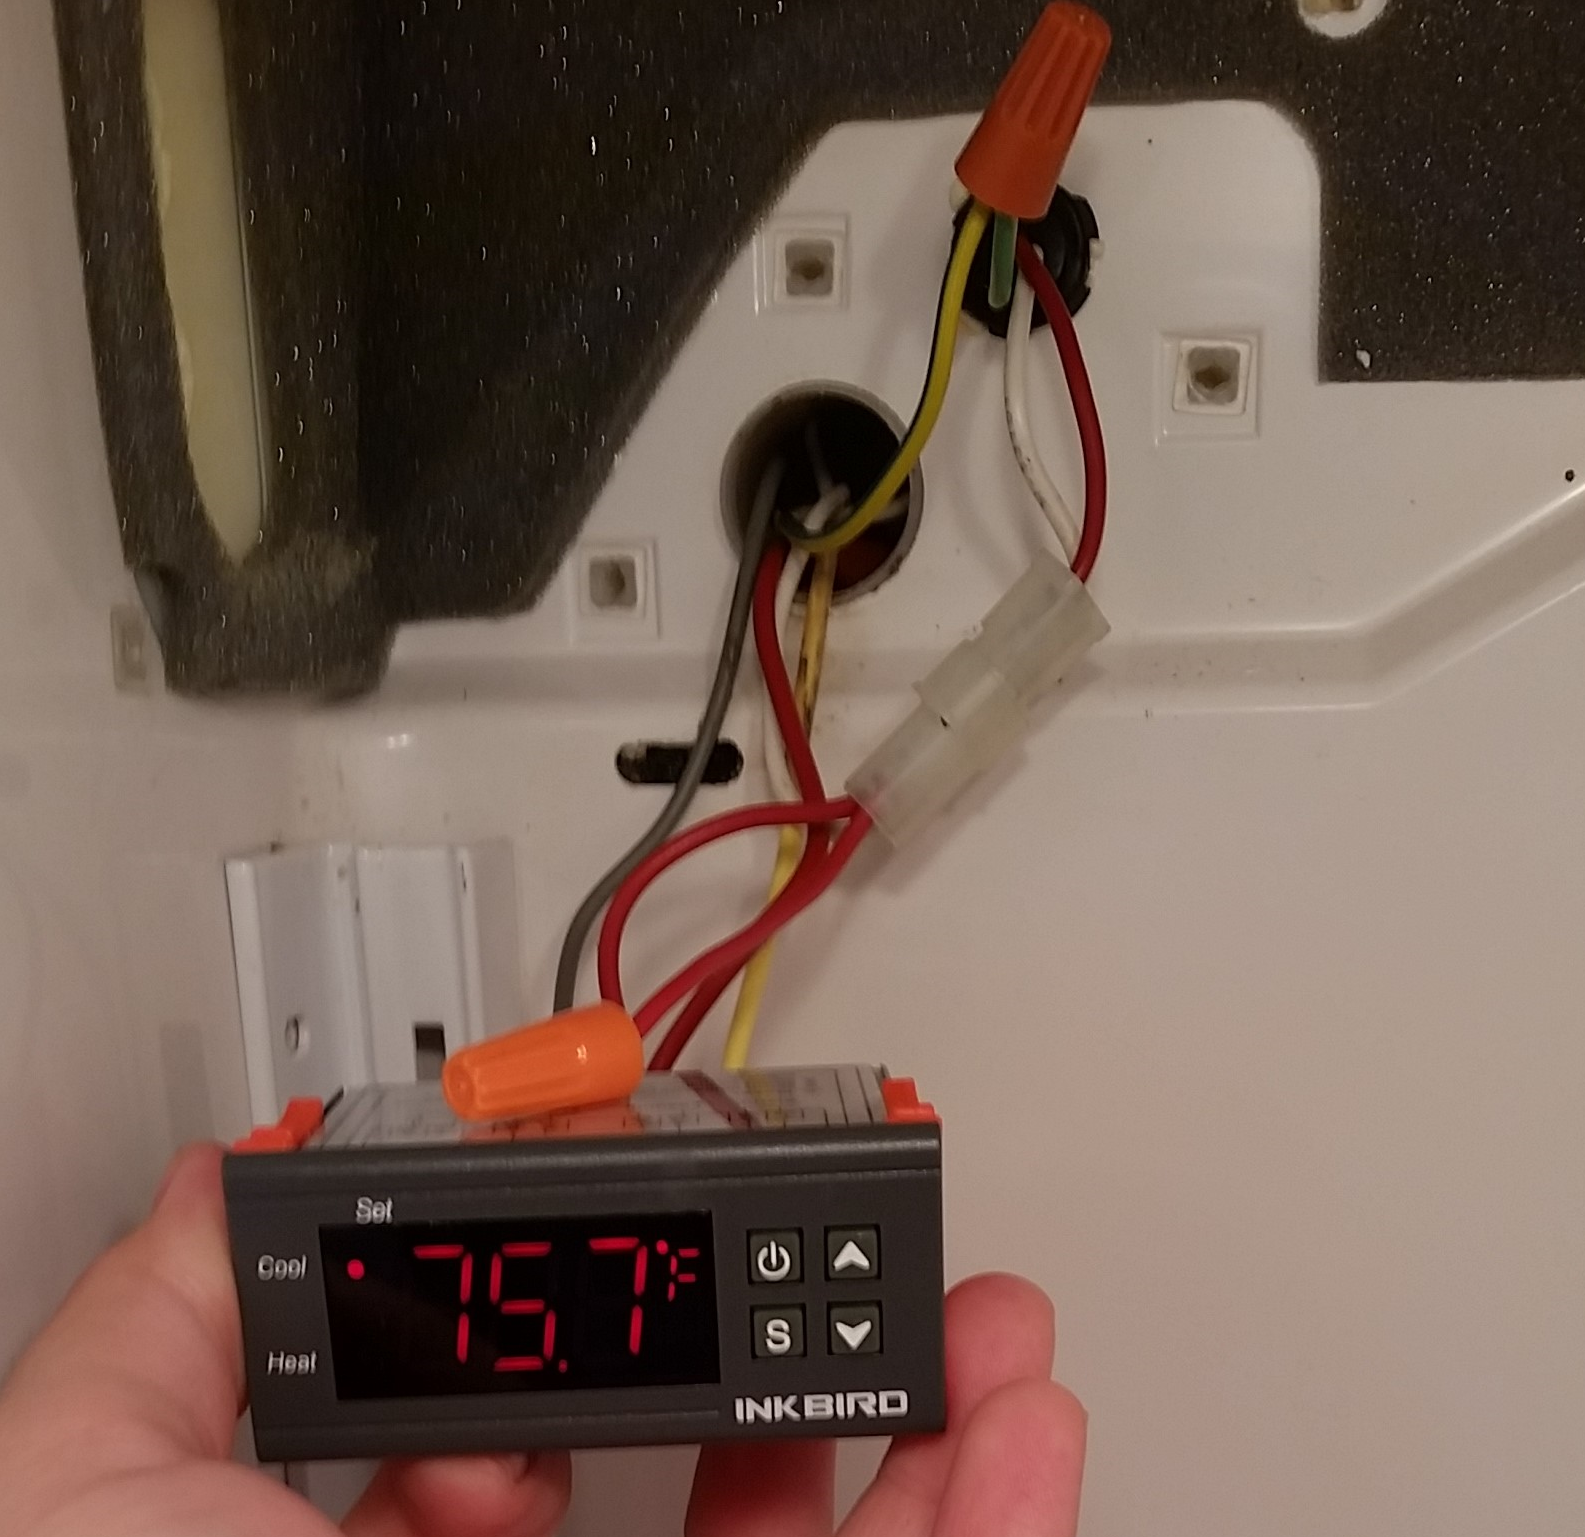 Help with wiring replacing minifridge thermostat with Inkbird ITC-1000